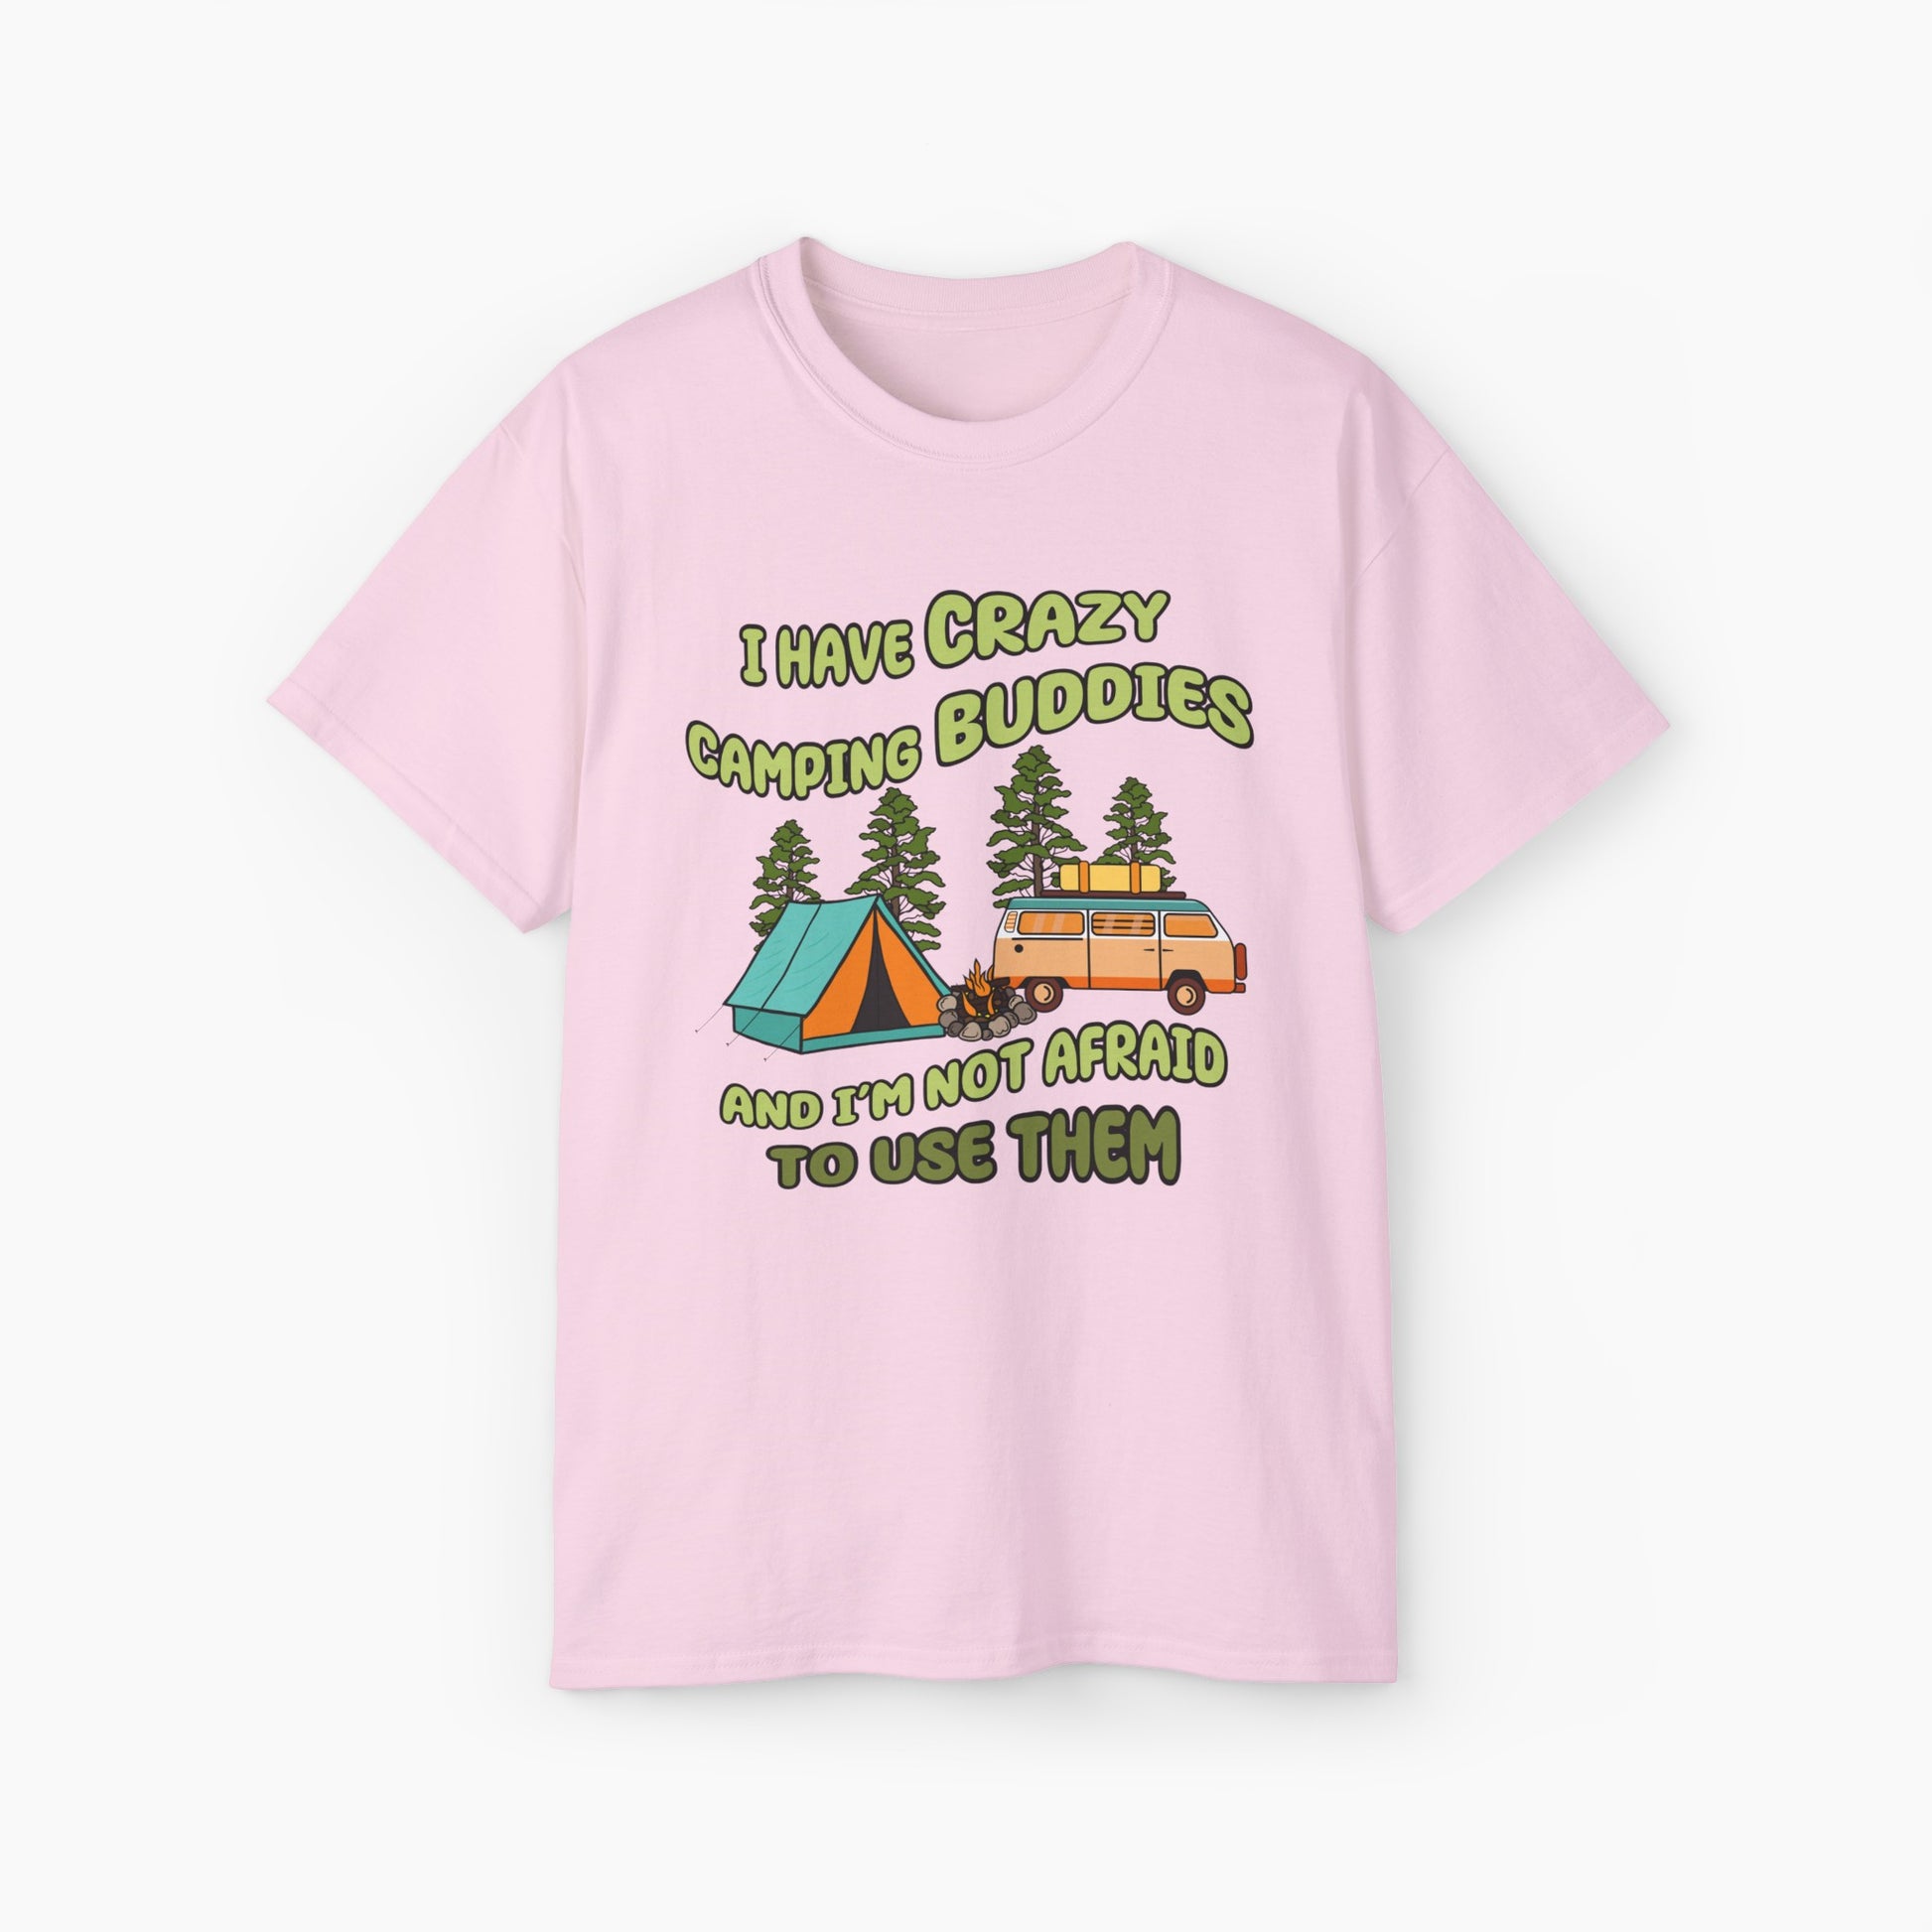 Light pink t-shirt with the text 'I have crazy camping buddies and I am not afraid to use them,' featuring a camping van, campfire, trees, and a tent."